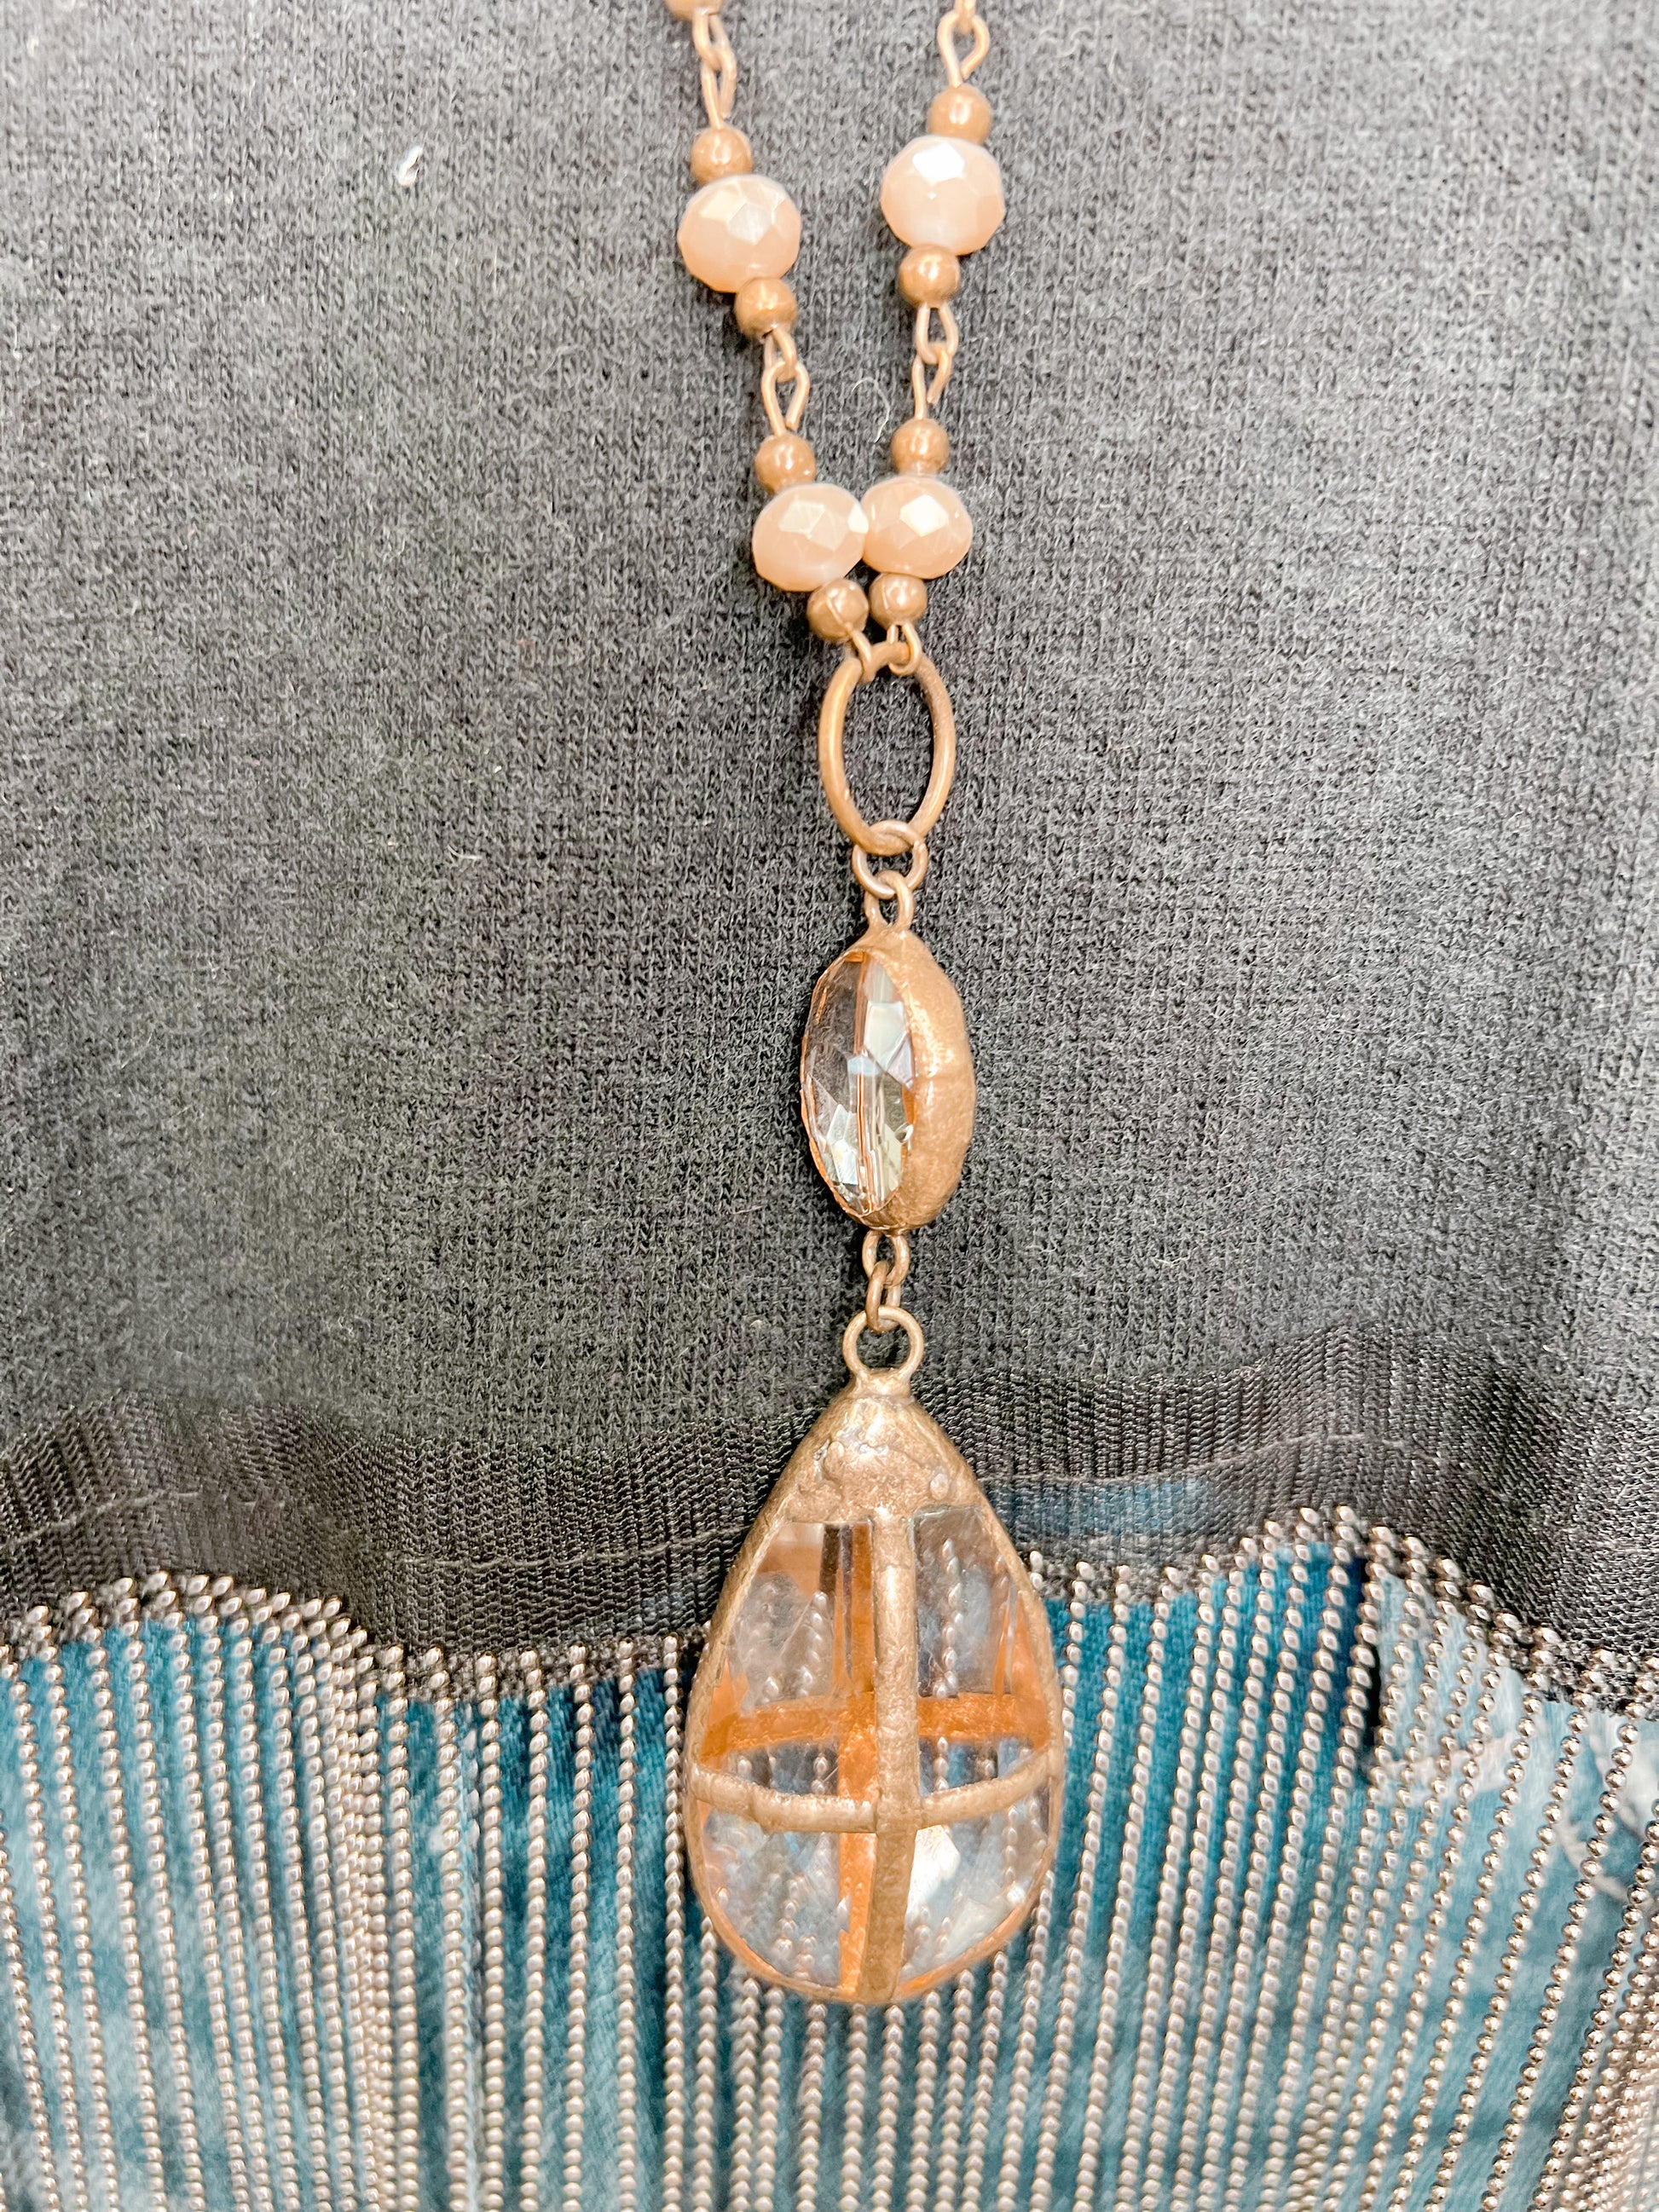 Antique Gold & Nude Crystal Bead Long Necklace with Large Teardrop Pendant-Necklace-OMO Jewelry-NE327660-The Twisted Chandelier